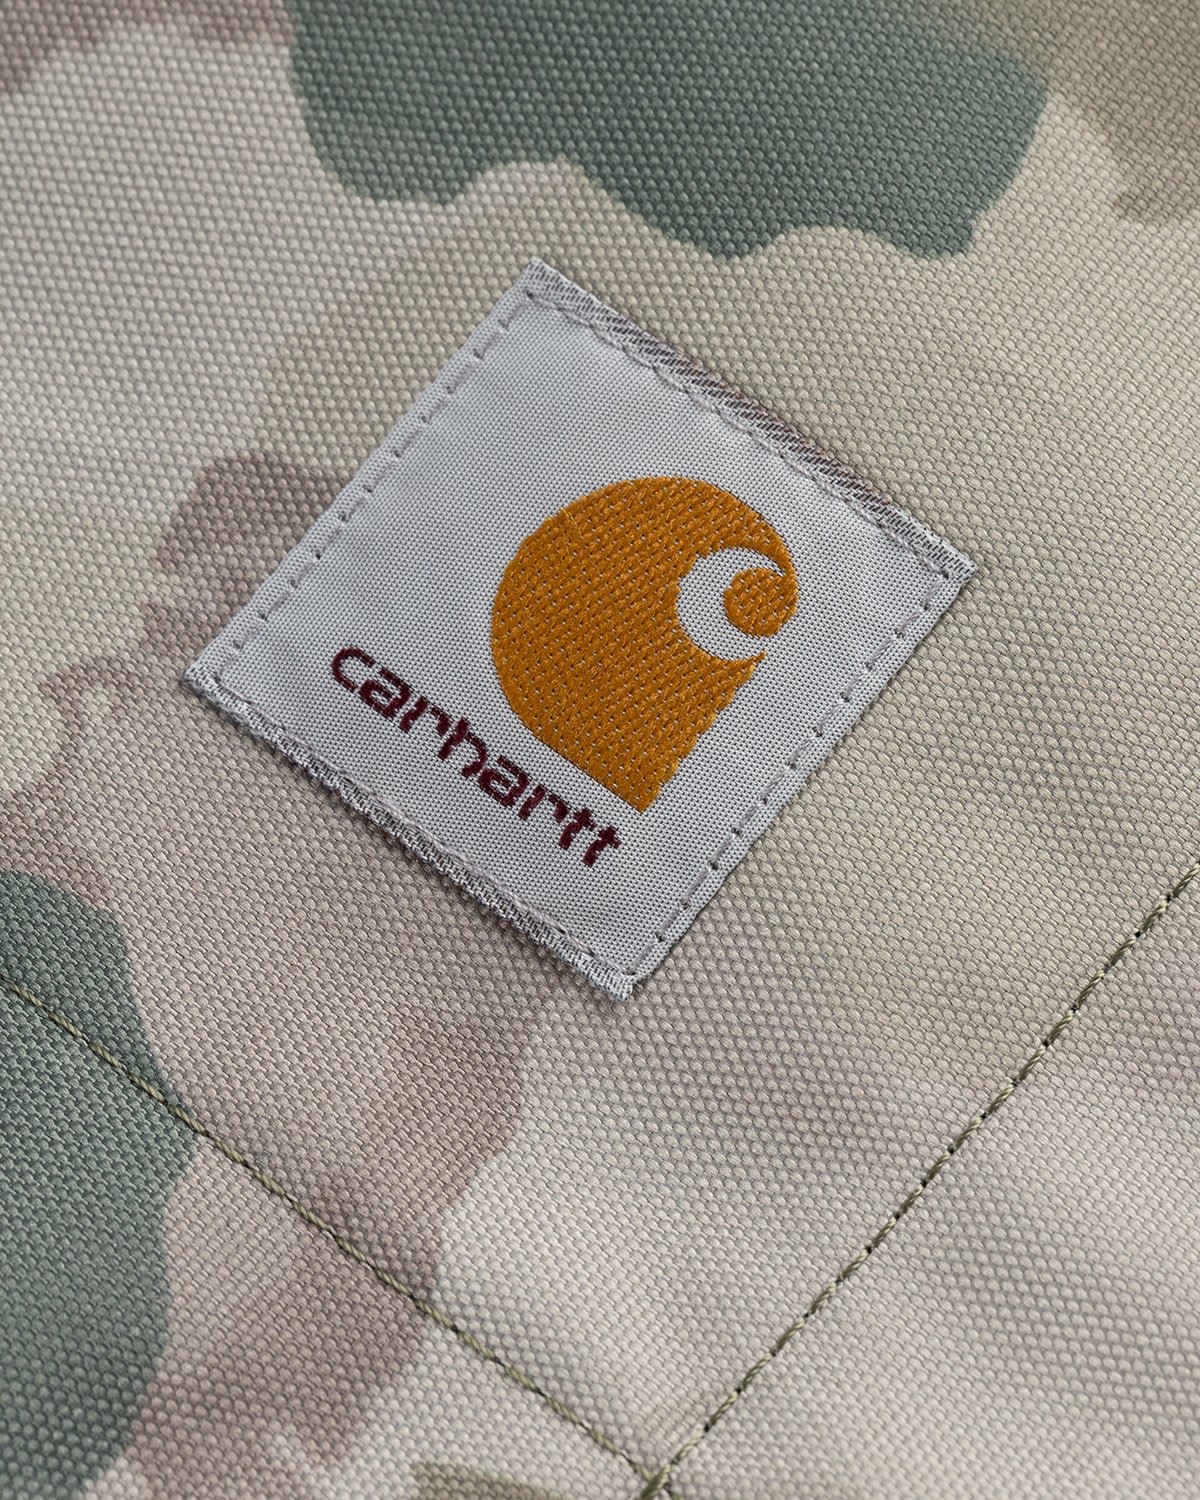 Carhartt WIP - Picnic Blanket Camo Tide Thyme - Lifestyle - Green - Image 5